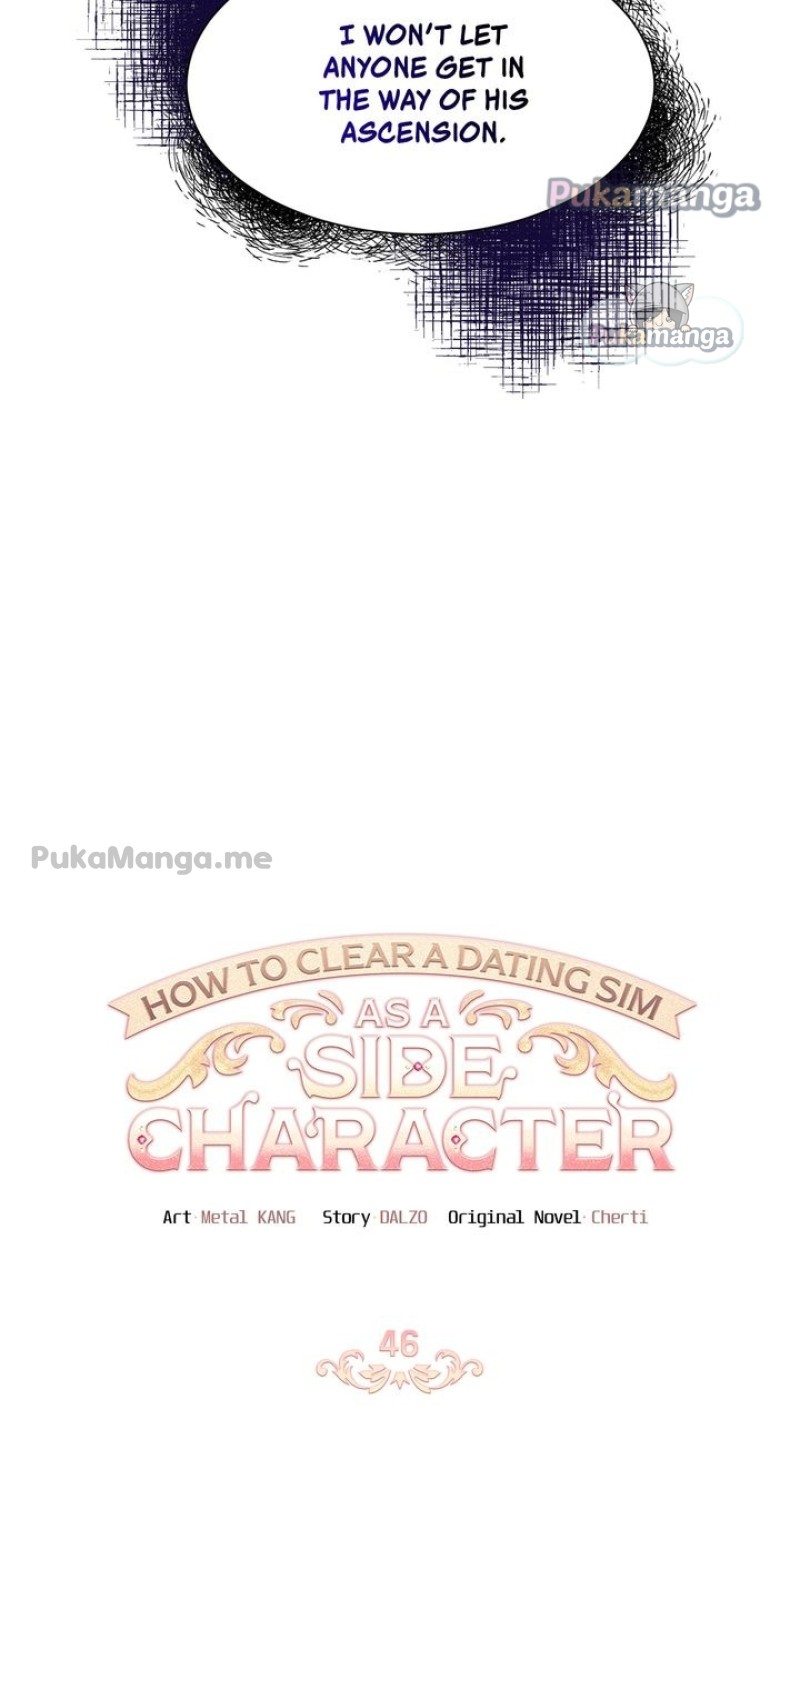 How To Clear A Dating Sim As A Side Character - Page 2